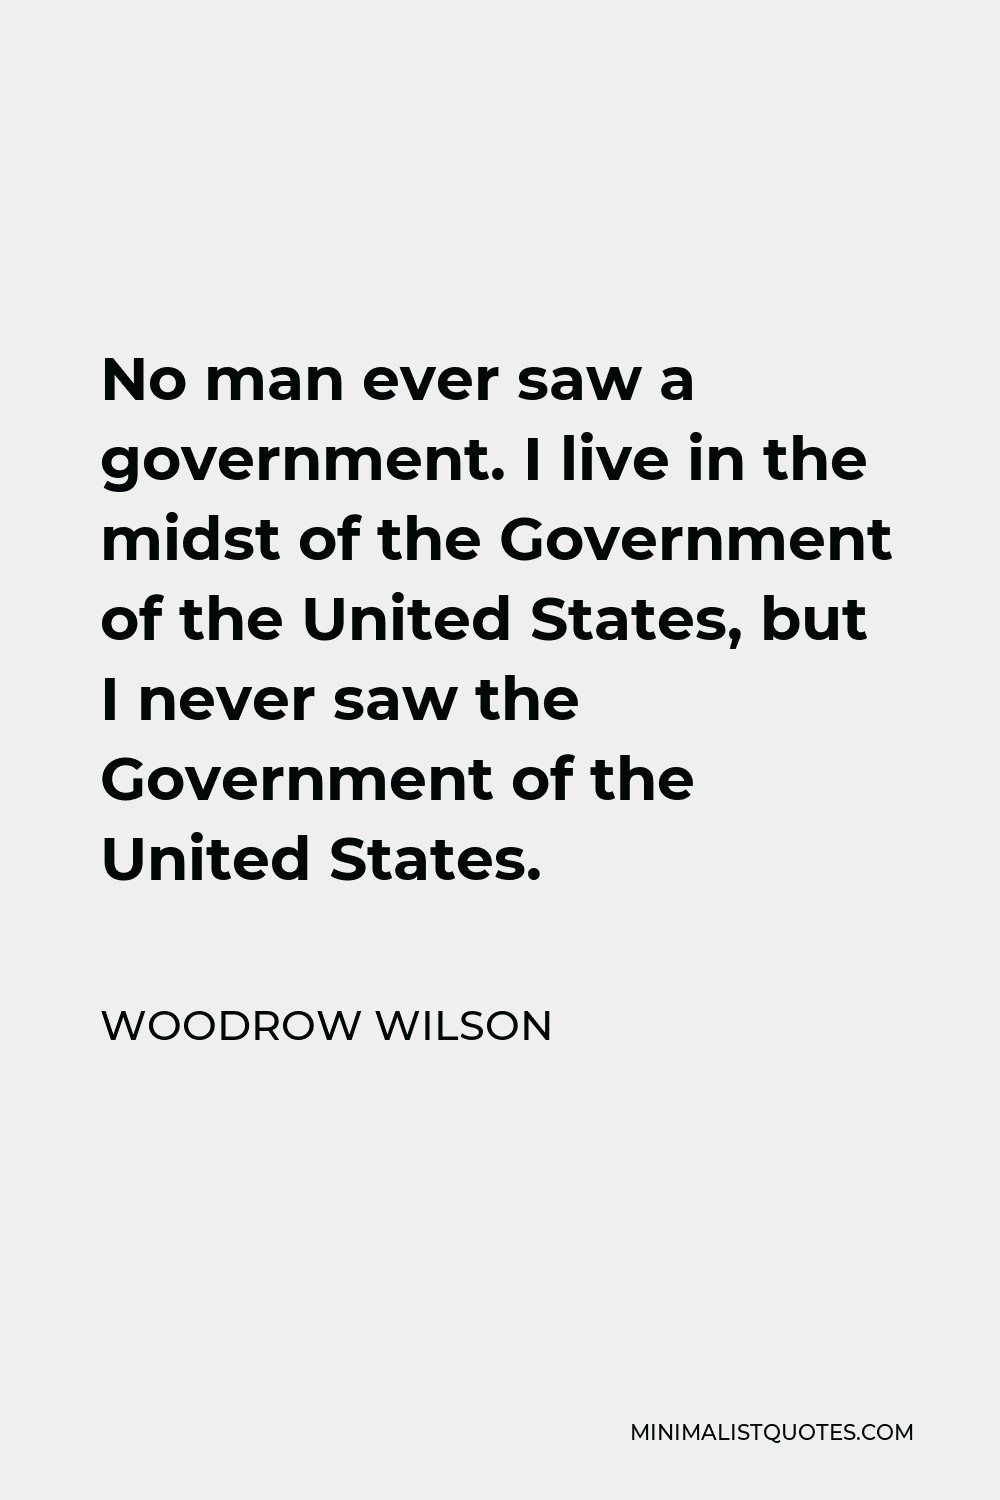 Woodrow Wilson Quote - No man ever saw a government. I live in the midst of the Government of the United States, but I never saw the Government of the United States.